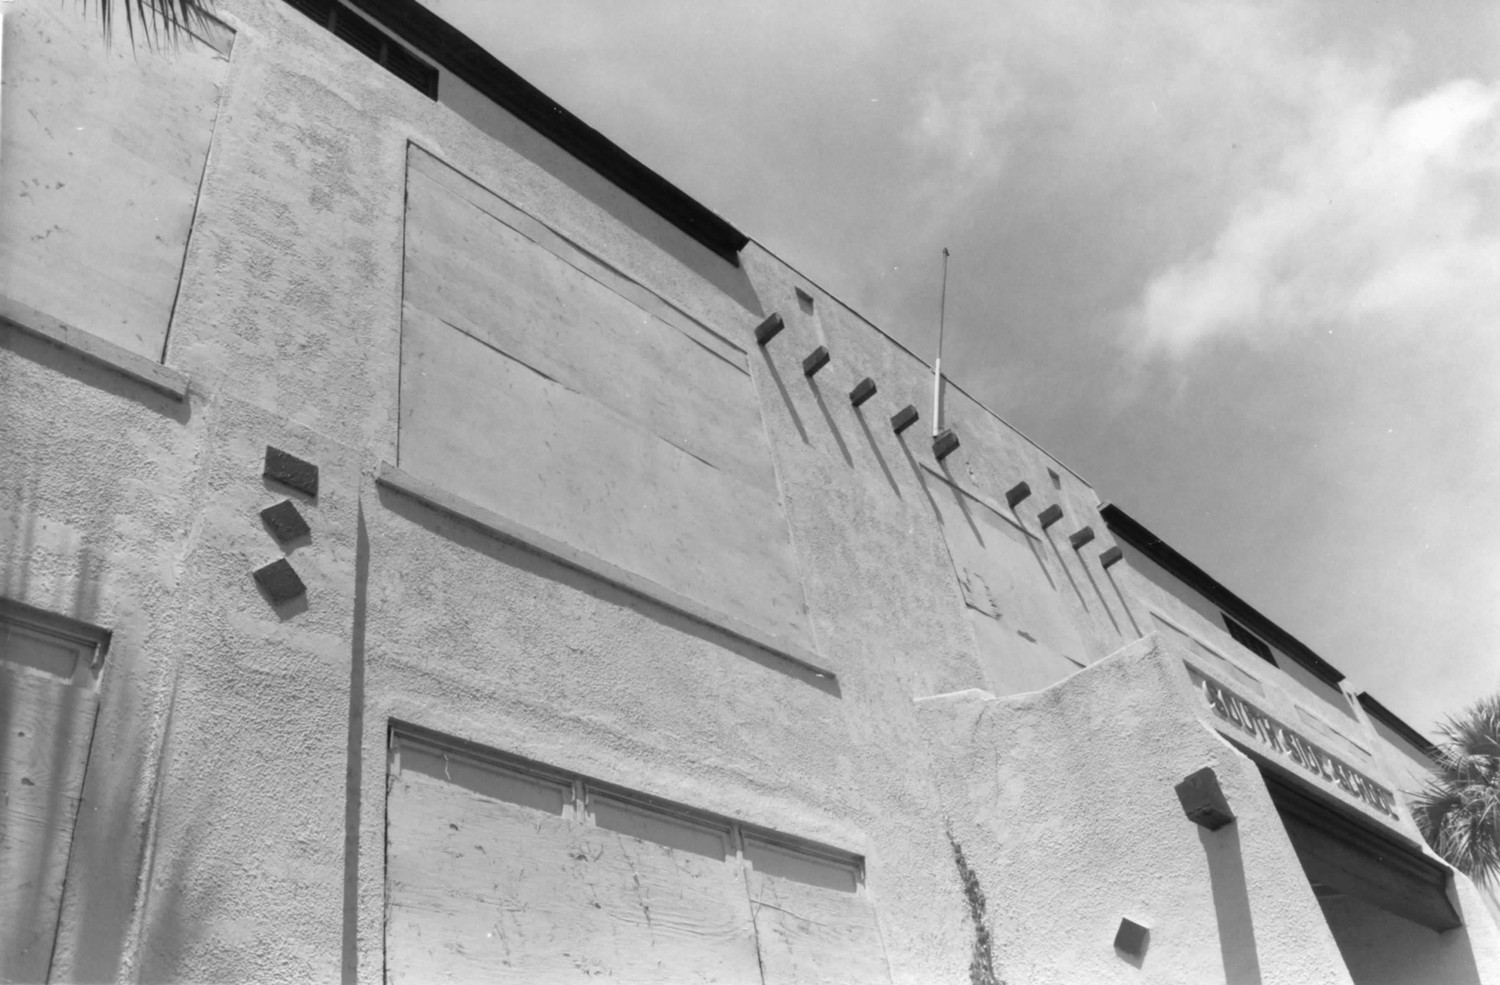 South Side School, Fort Lauderdale Florida Front exterior, south of front entrance, showing diamonds, scuppers, and other detail, facing southwest (2005)